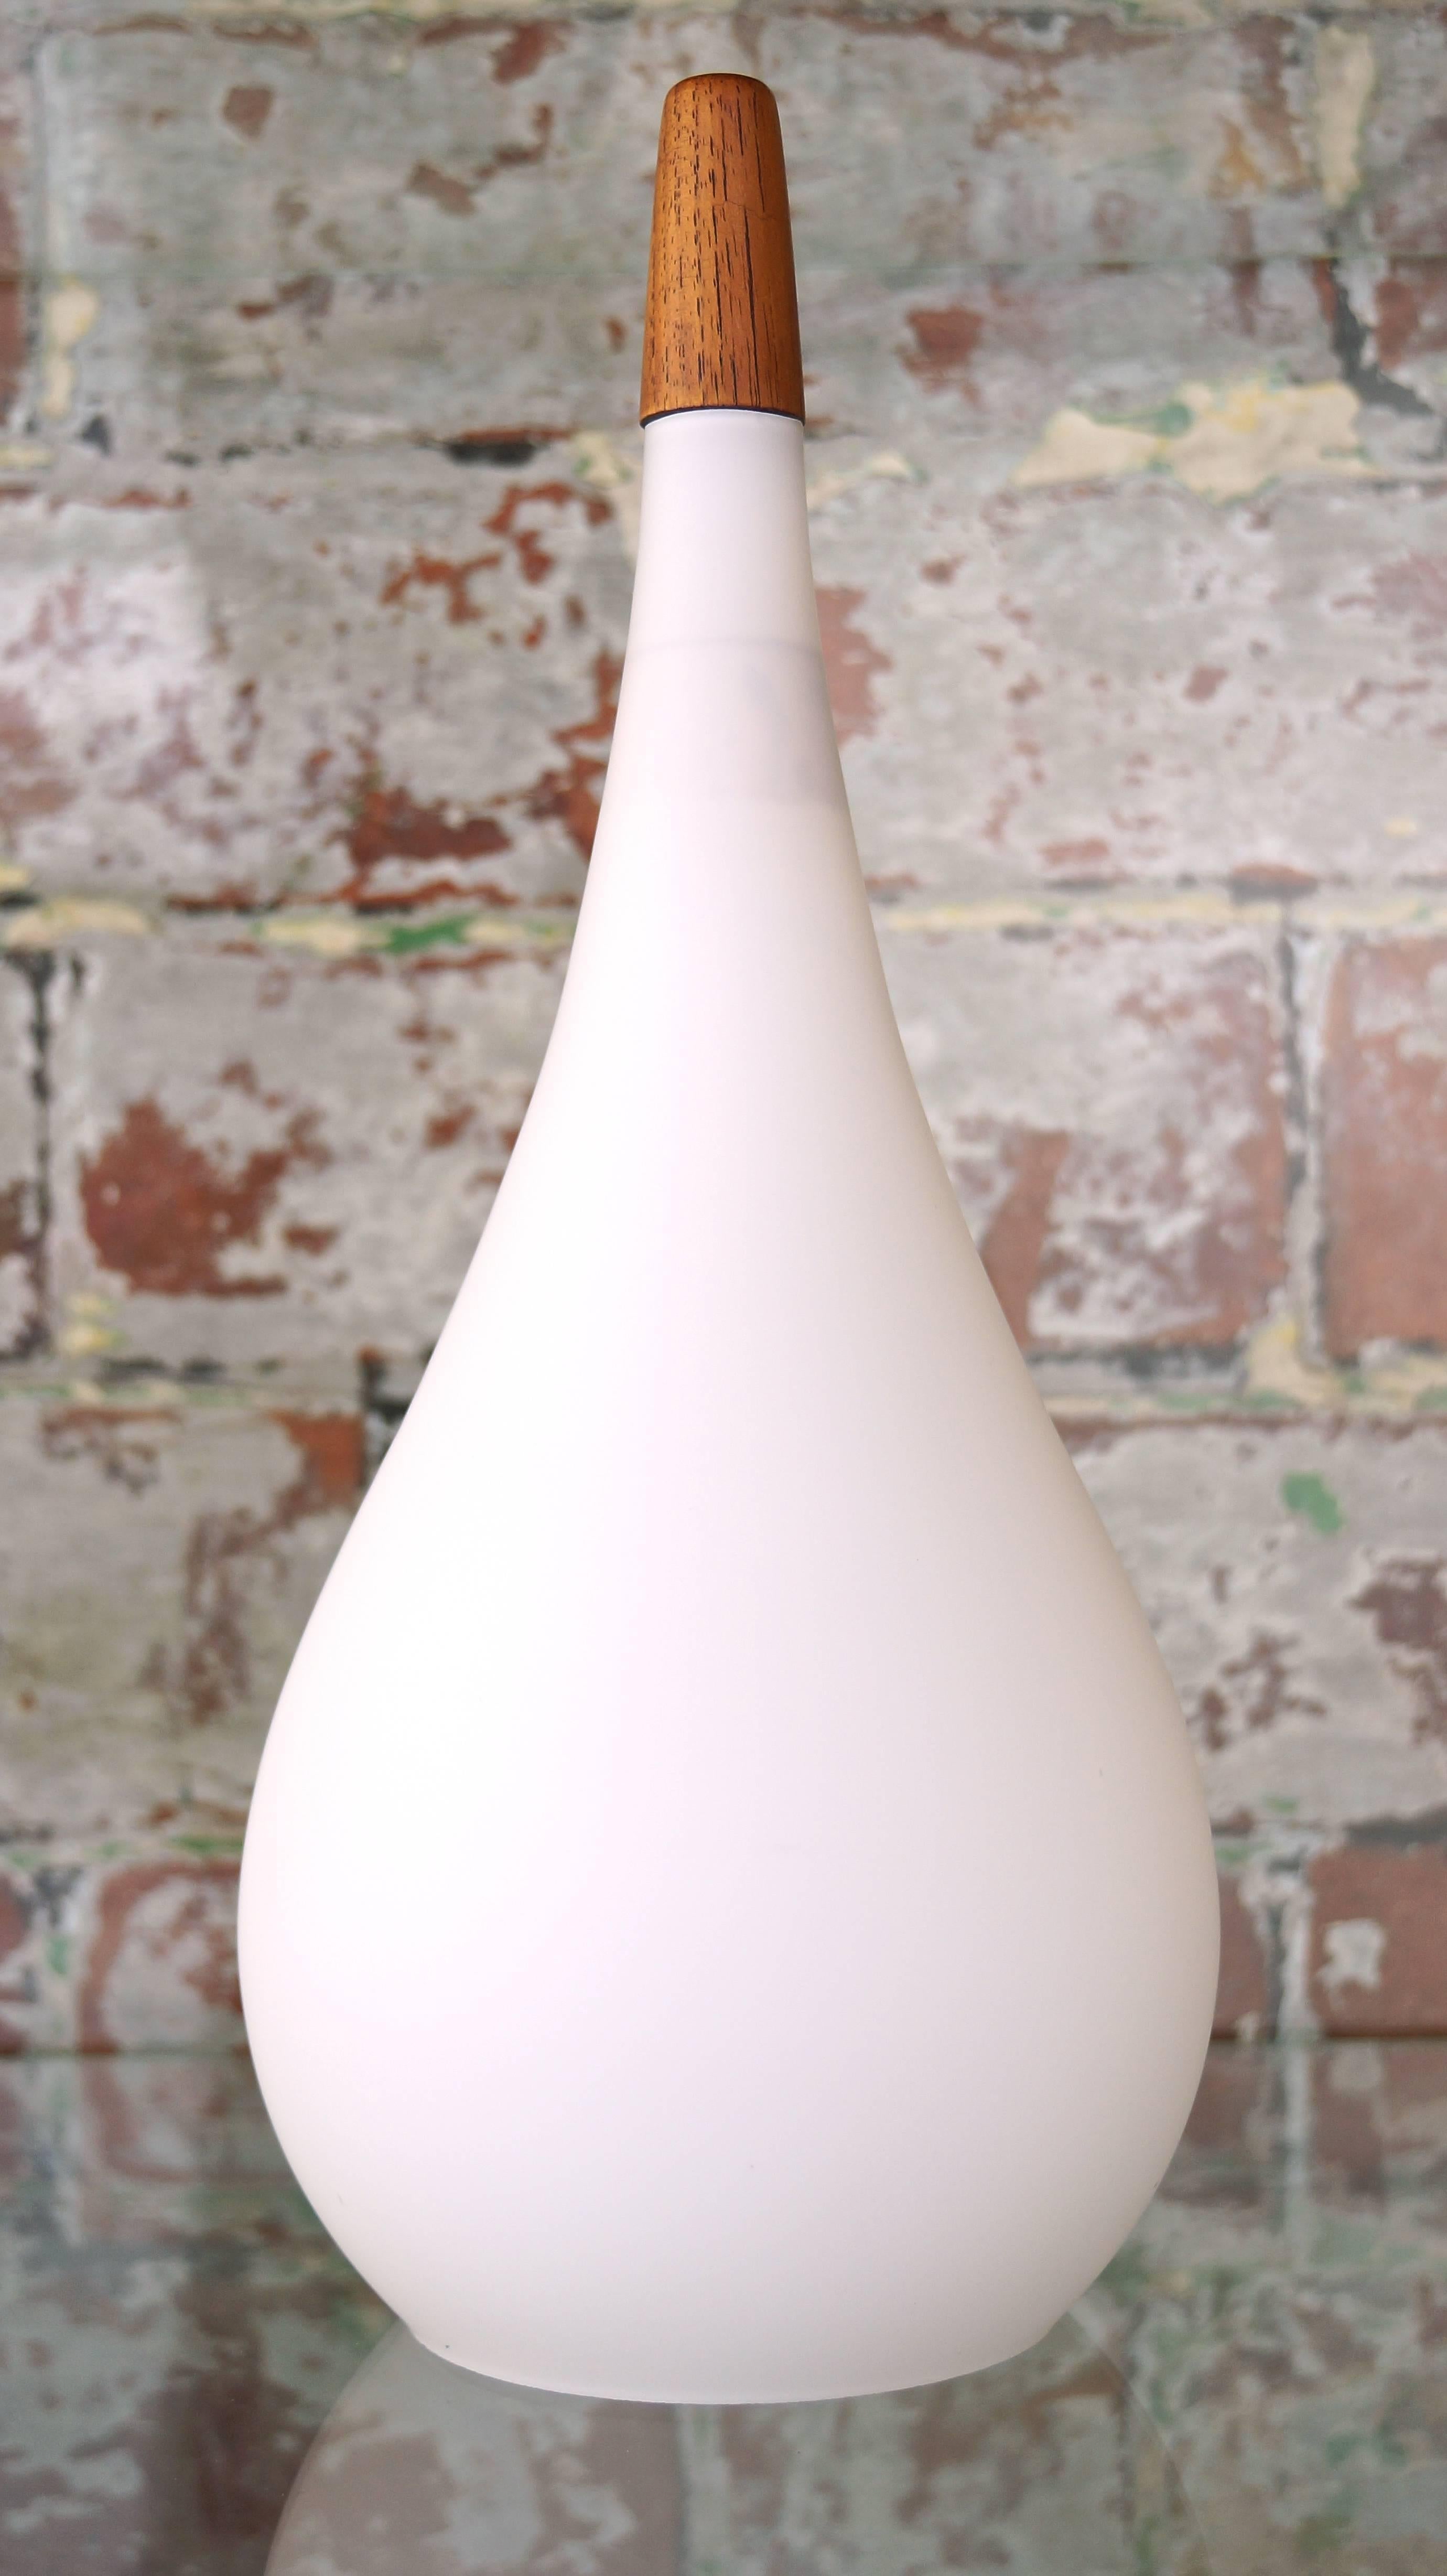 Vintage white glass pendant drop light with solid teak finial.
Designer: Holmegaard, Denmark,
circa 1960s.

A beautiful Danish handblown 1960s matte white glass pendant drop light by Holmegaard, circa 1960s.

Finished with a lovely solid teak